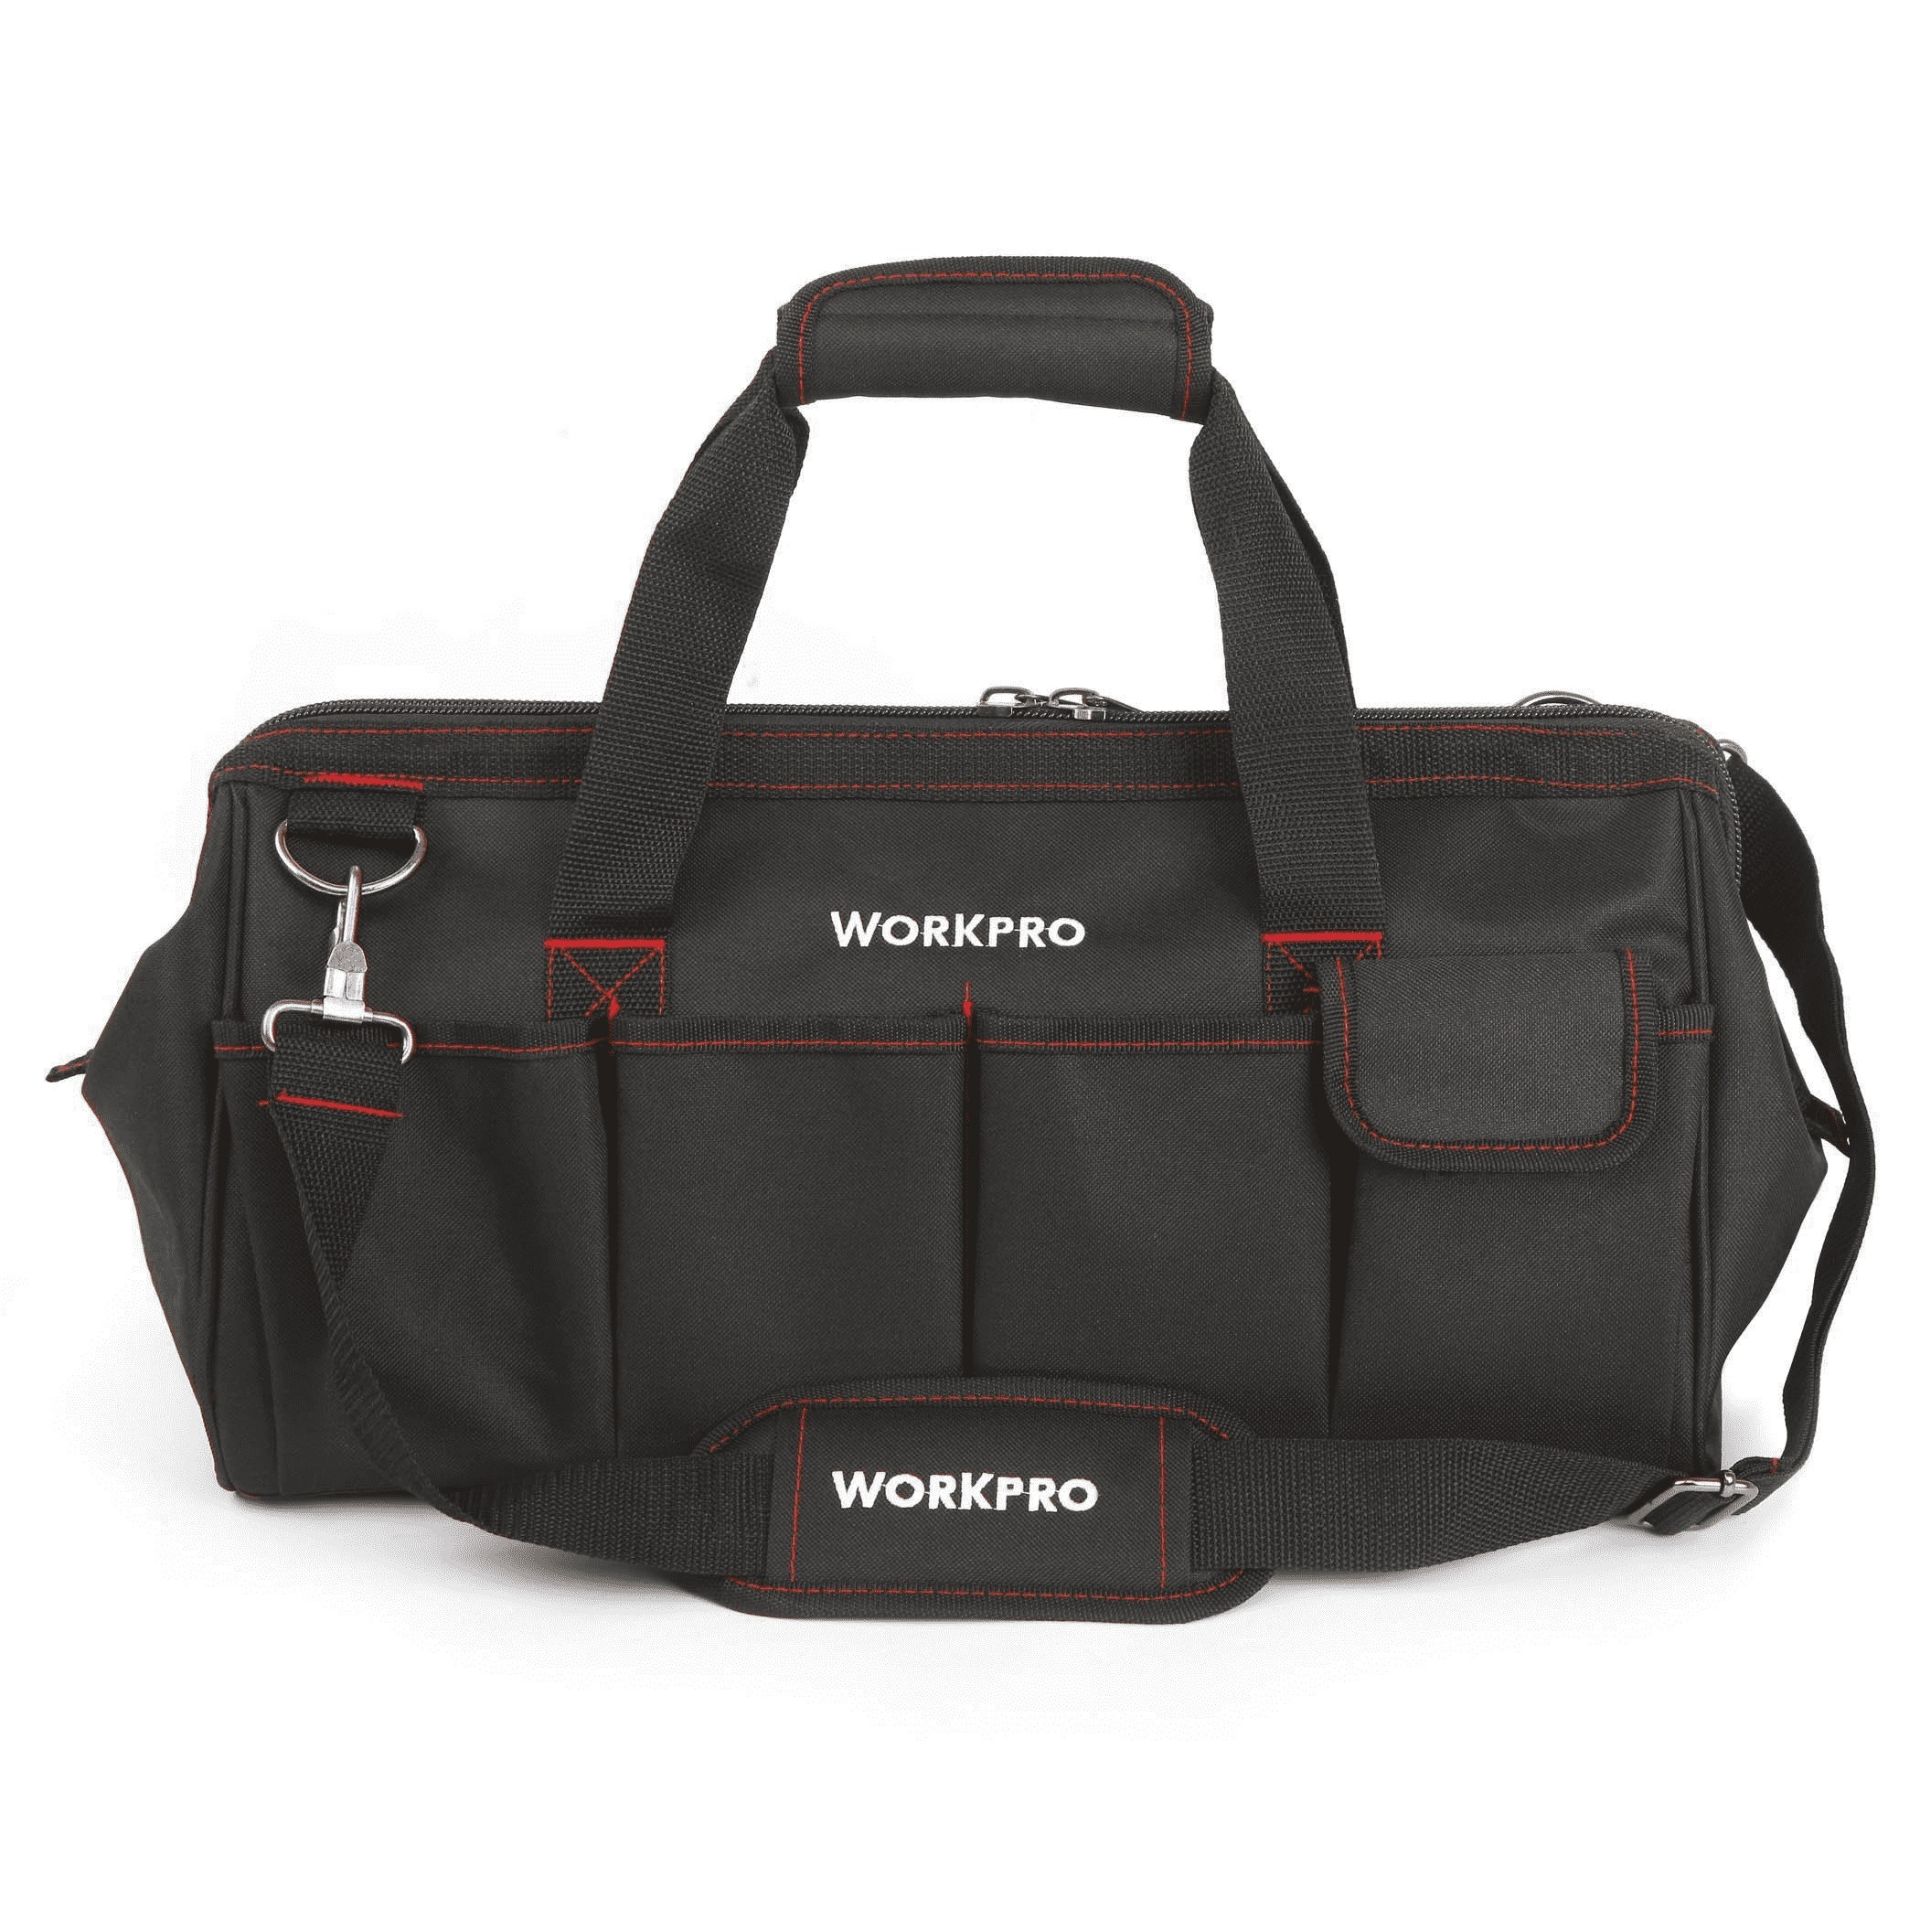 Bagged Brand New Workpro 18" Wide Mouth Tool Bags RRP £25 Each (W081023A)(Comes in 2 Boxes)